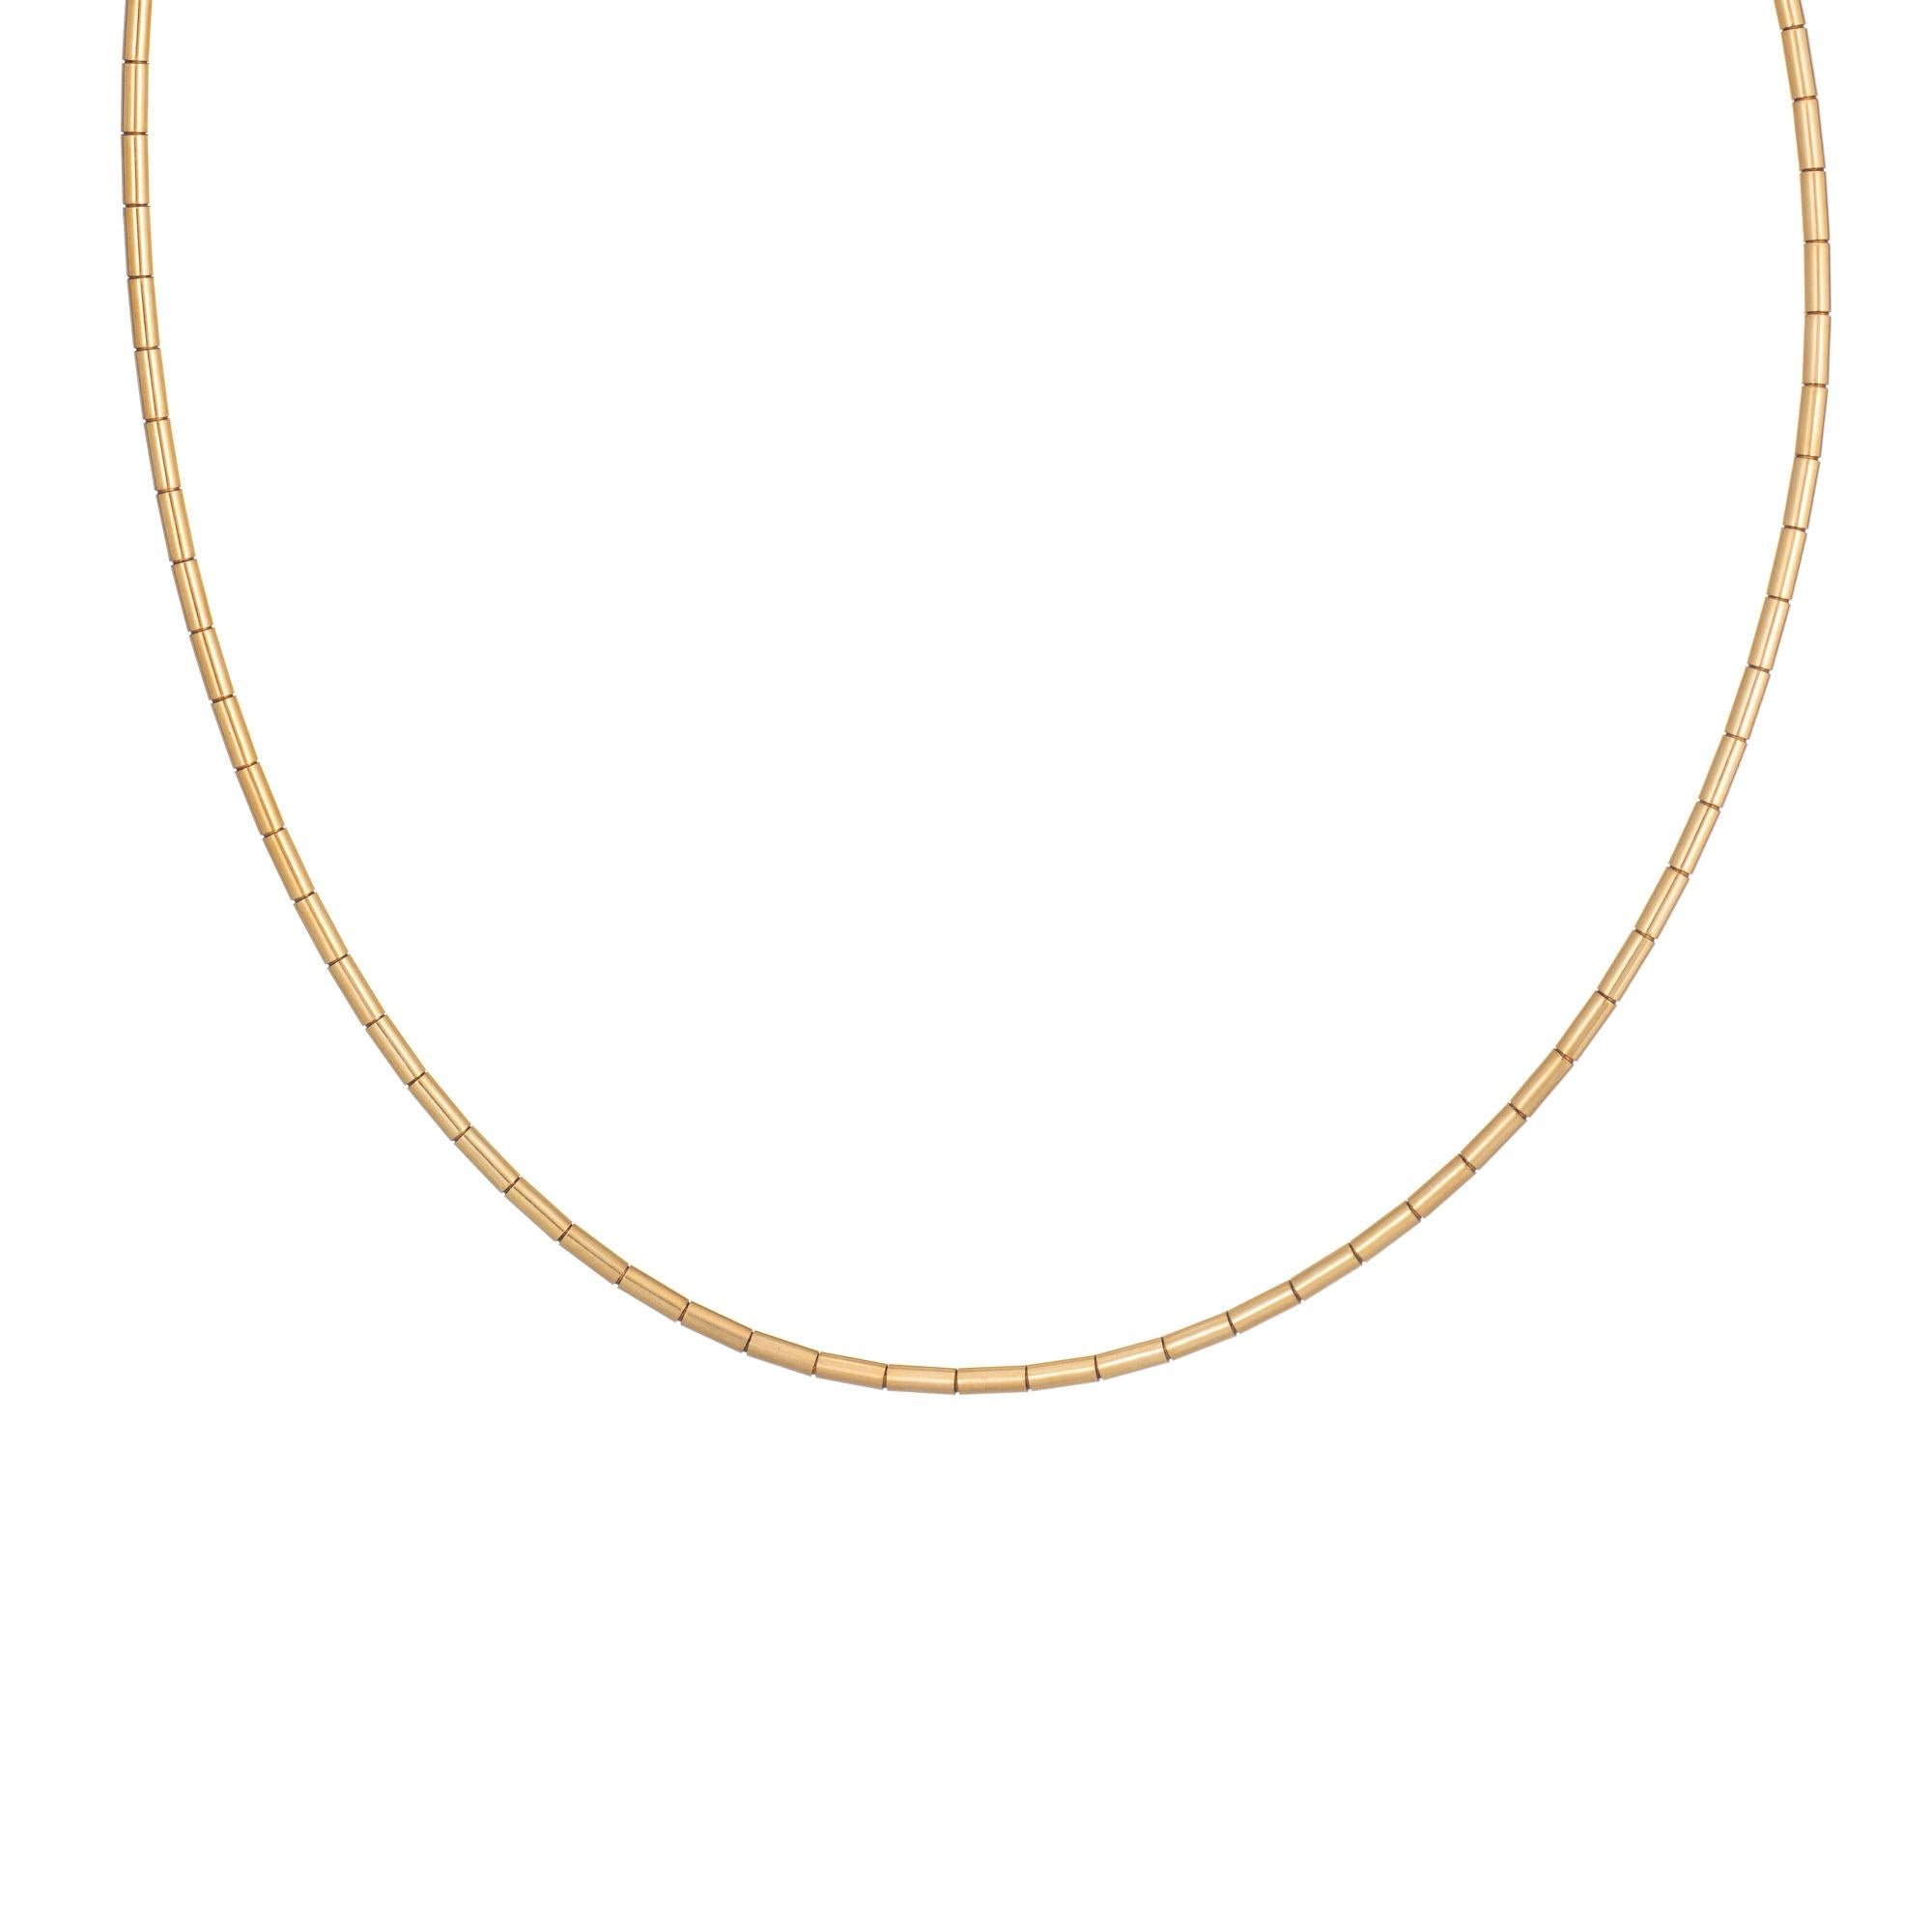 Stylish vintage Cartier necklace crafted in 18 karat yellow gold (circa 1999).  

The 15 1/2 inch necklace is designed as a choker to sit at the nape of the necklace. With a tubular link design the necklace is great worn alone (or add a pendant or